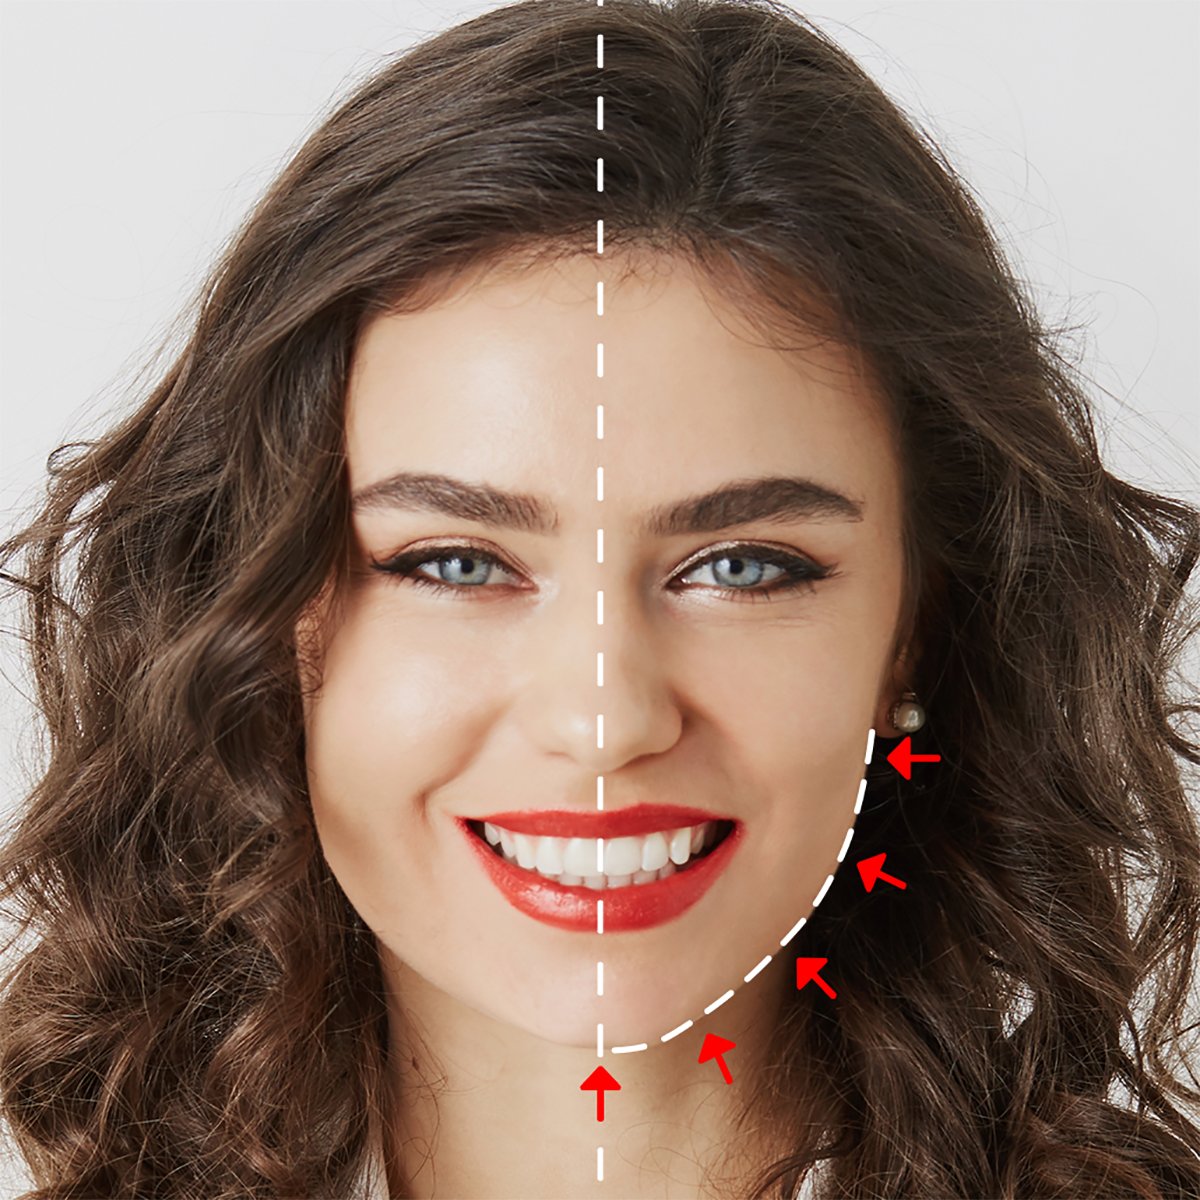 #FaceBeautification is a useful addition to social networking, video streaming, gaming and dating apps. Our SuperTouch AI can fine-tune your facial features in real-time.

Find out how you can help your users become camera-ready - supertouch.ai/facial-attribu…

#VideoEnhancement #AR